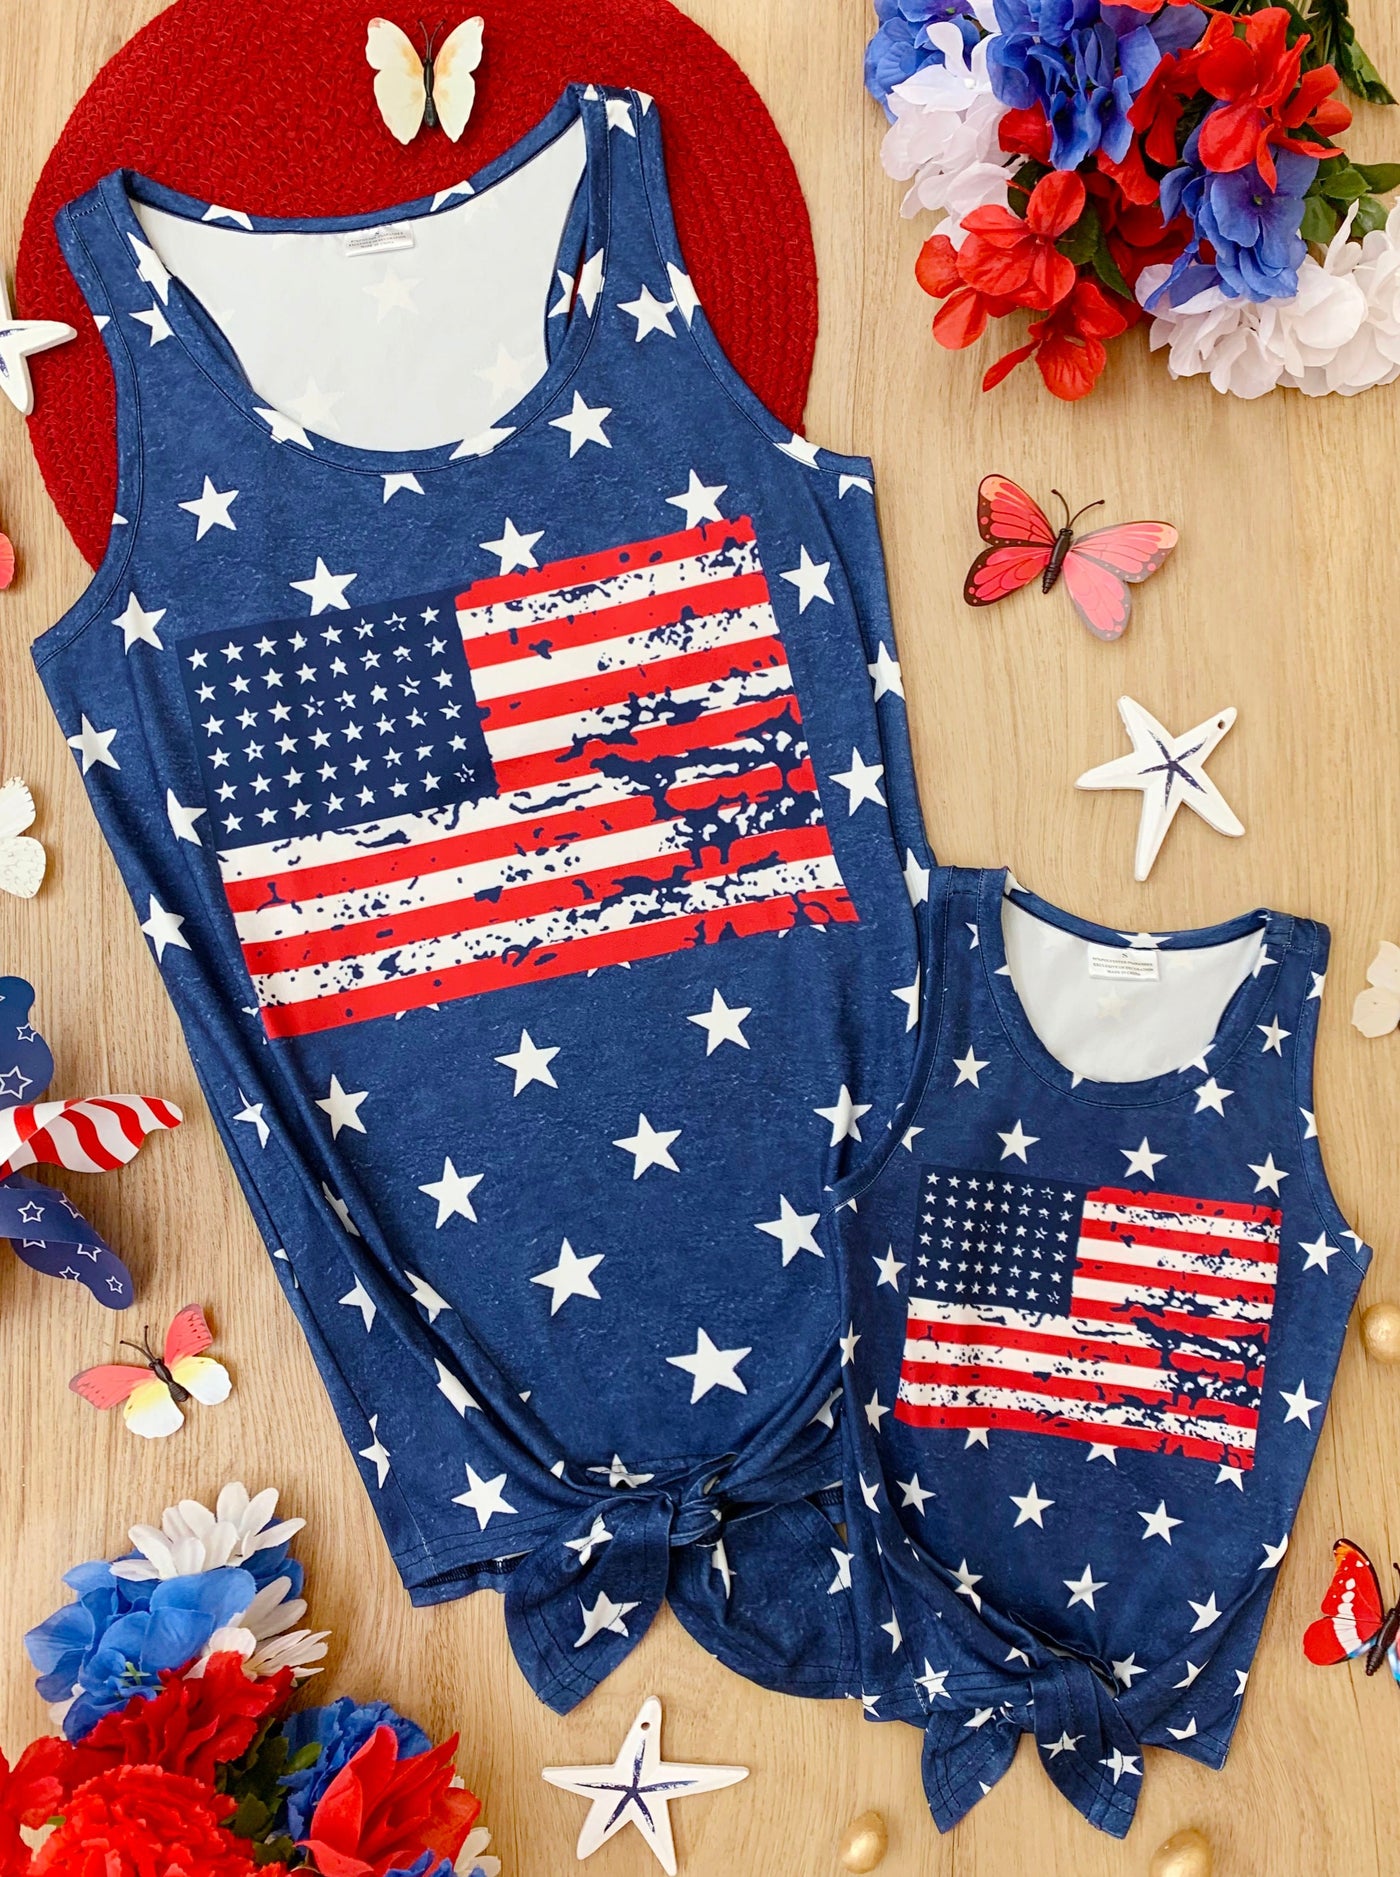 Mommy and Me Star and Stripes Knot Hem Tank TopMommy & Me 4th Of July Top | US Flag Stars & Stripes Knot Hem Tank Top